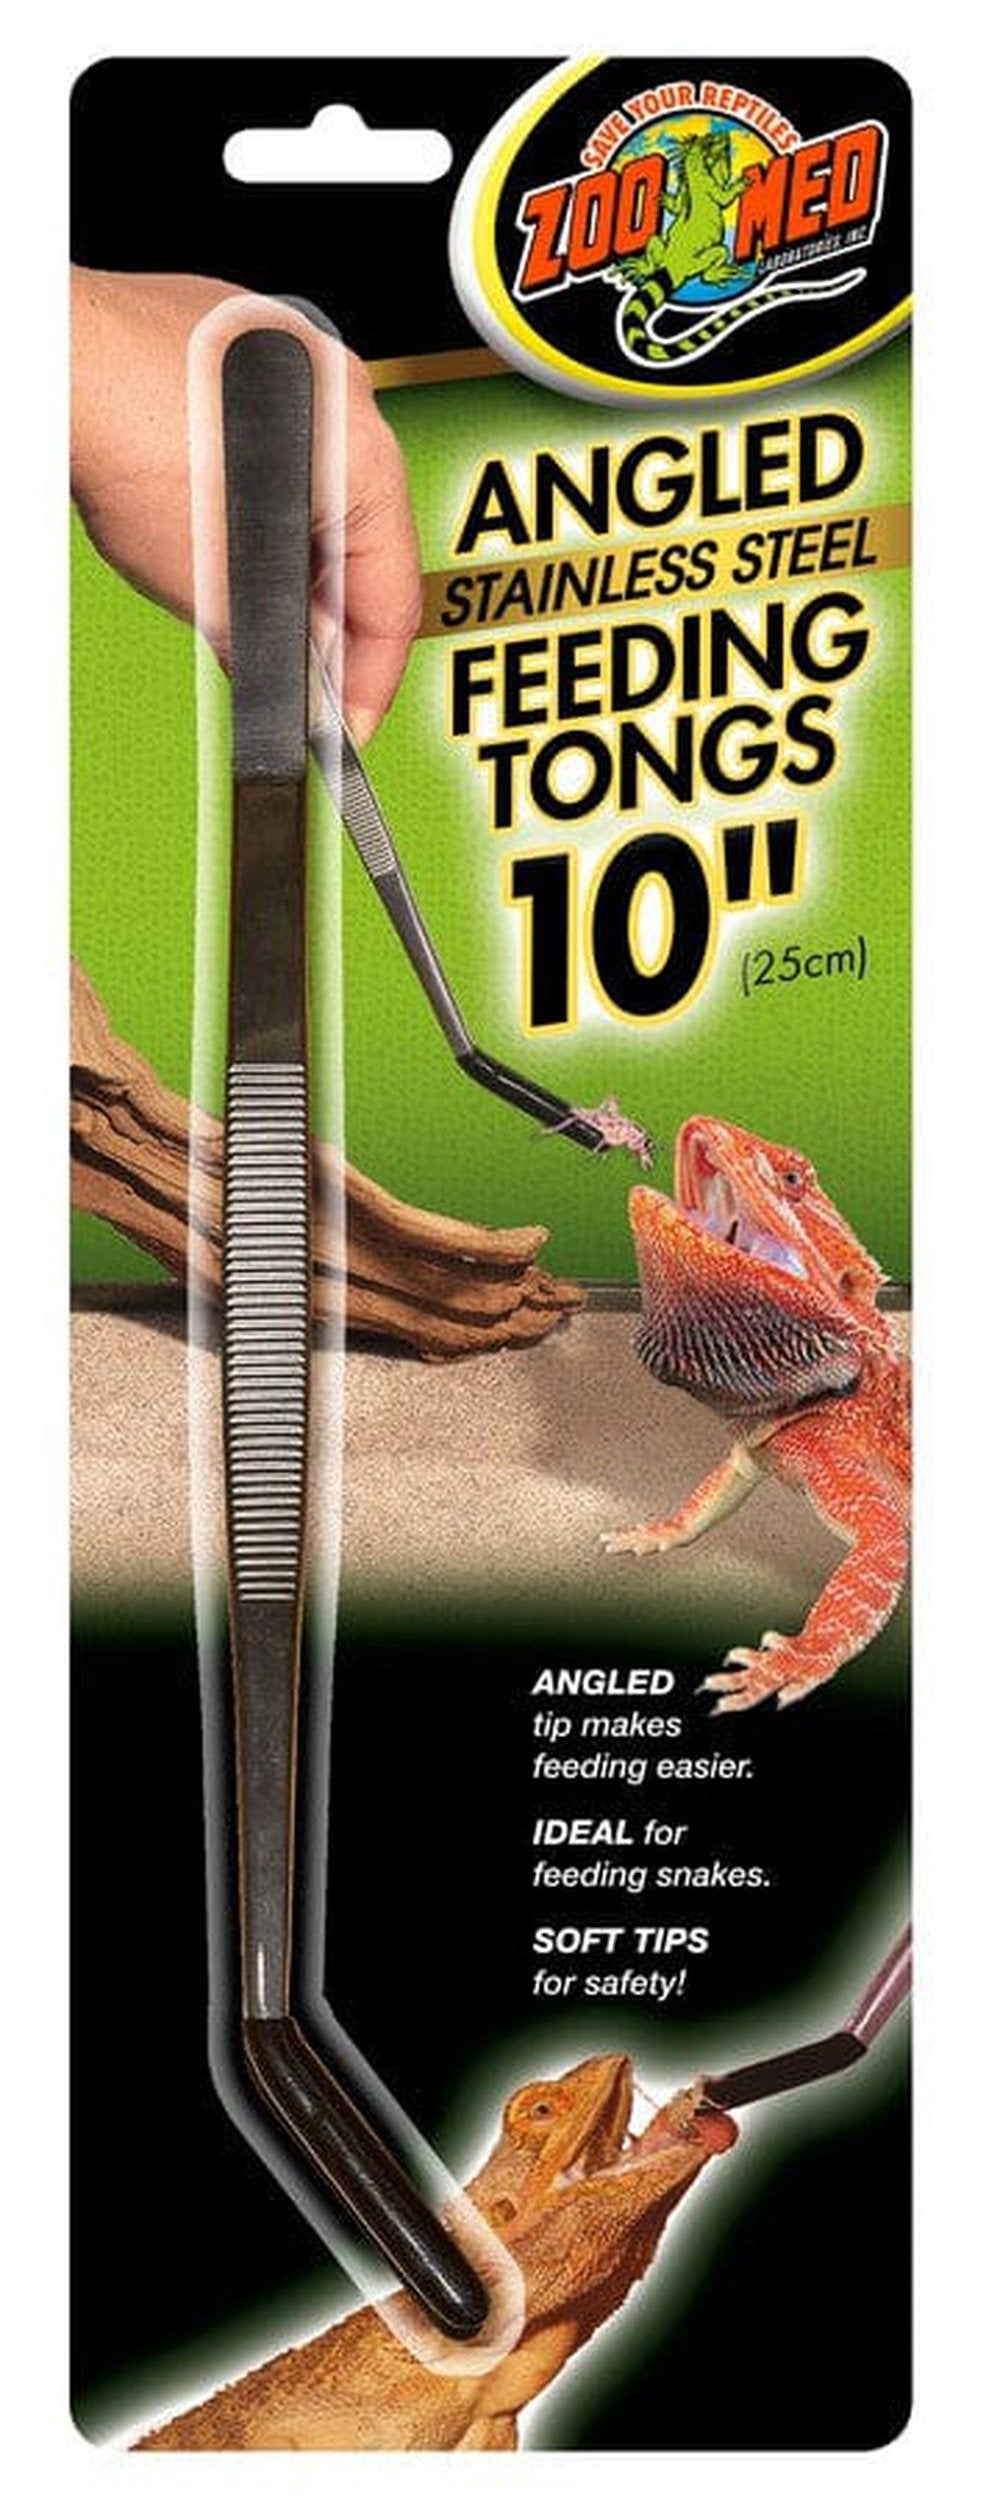 Zoo Med Angled Stainless Steel Feeding Tongs 10″